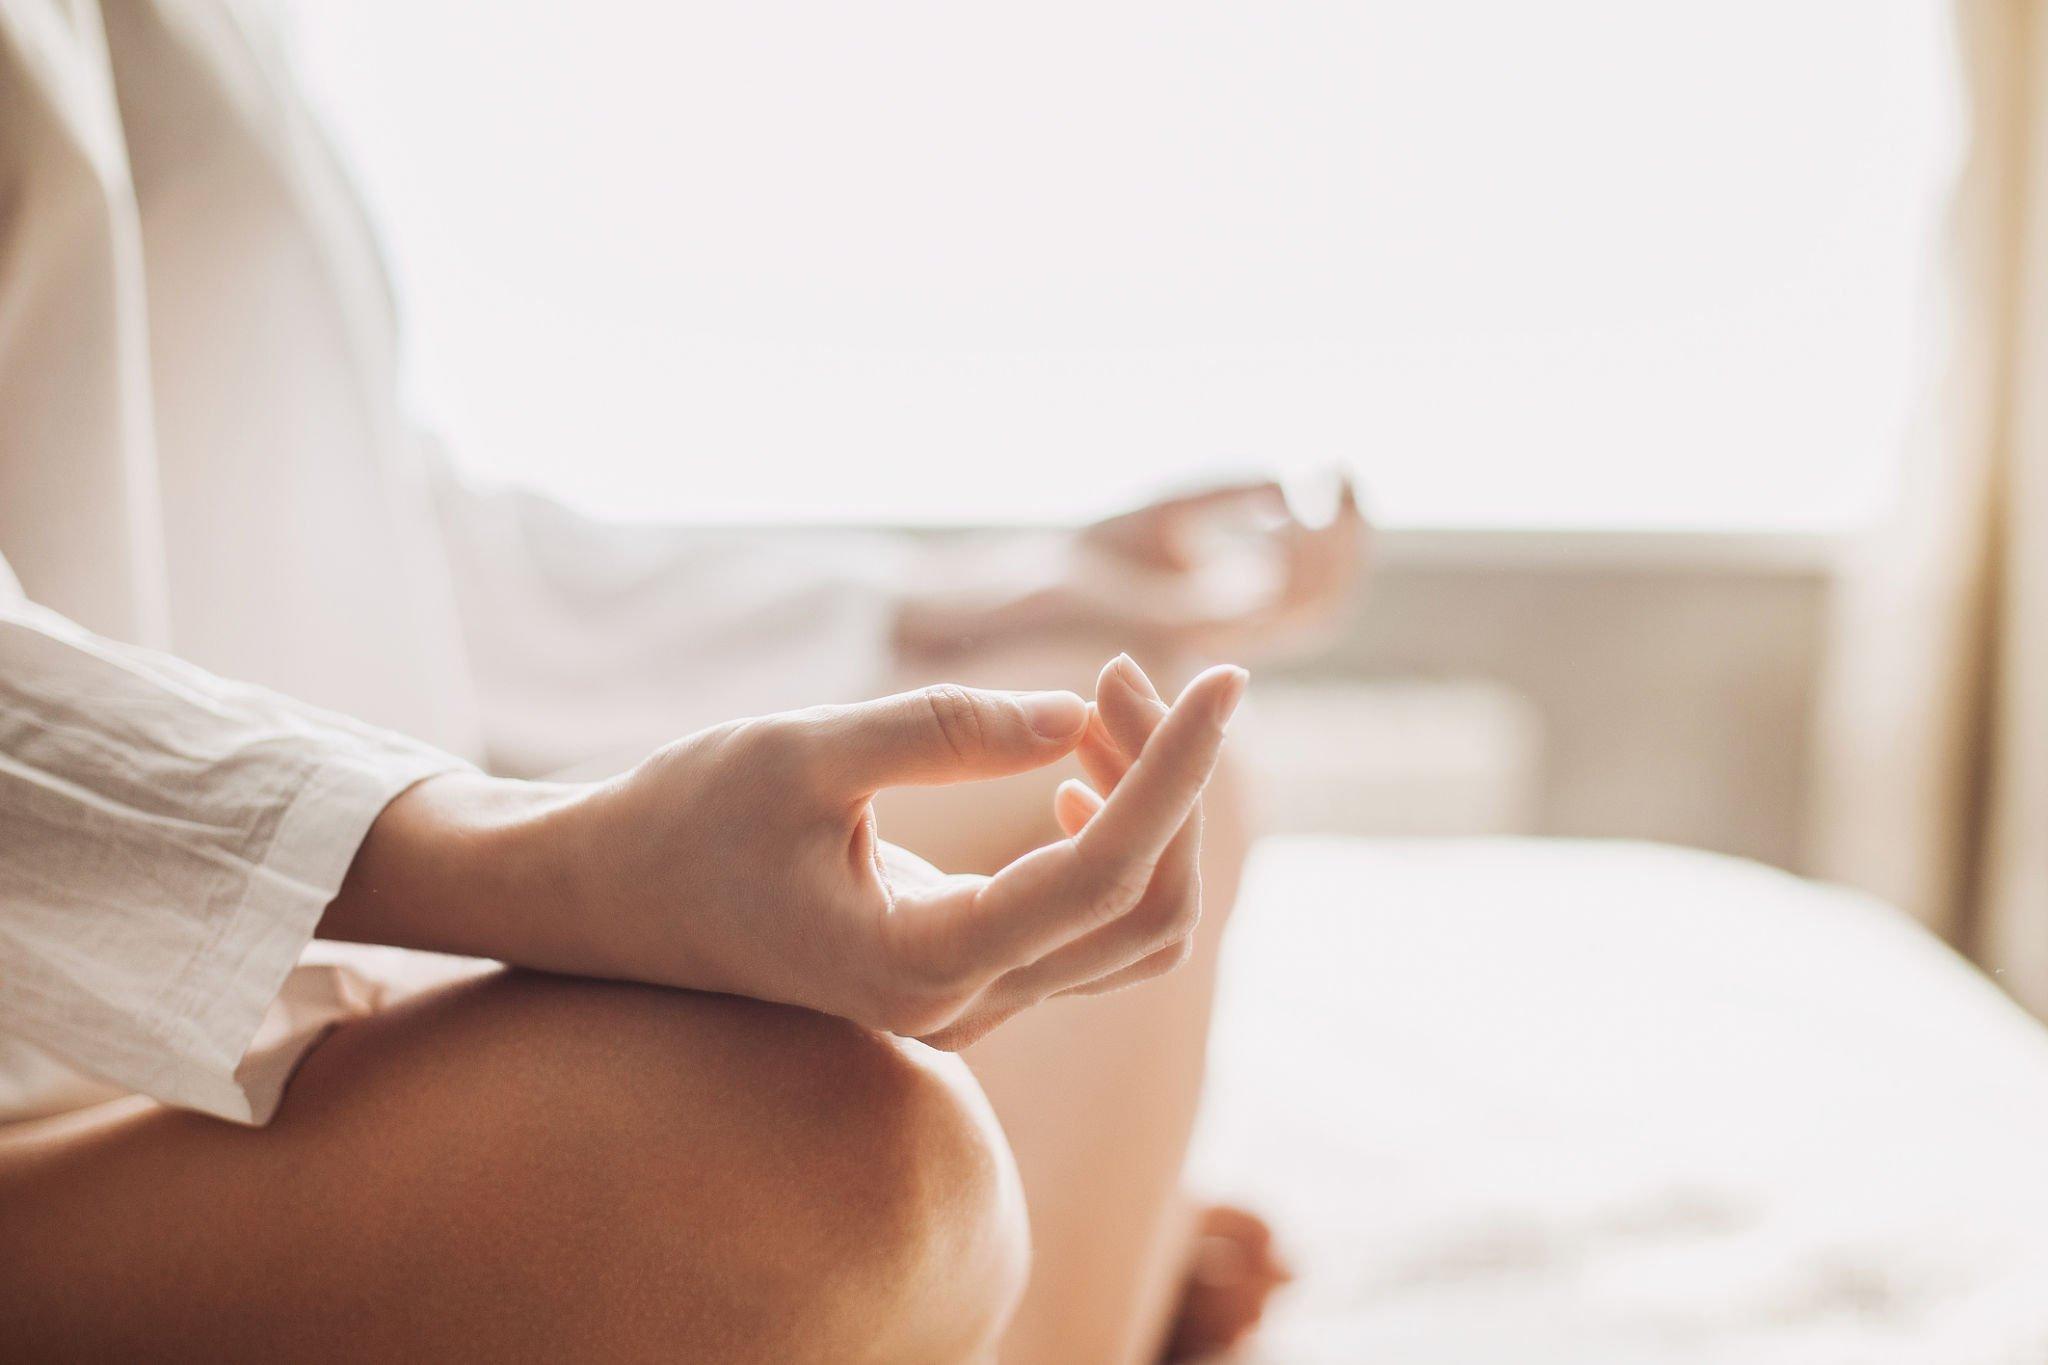 My journey with meditation: A beginner's guide